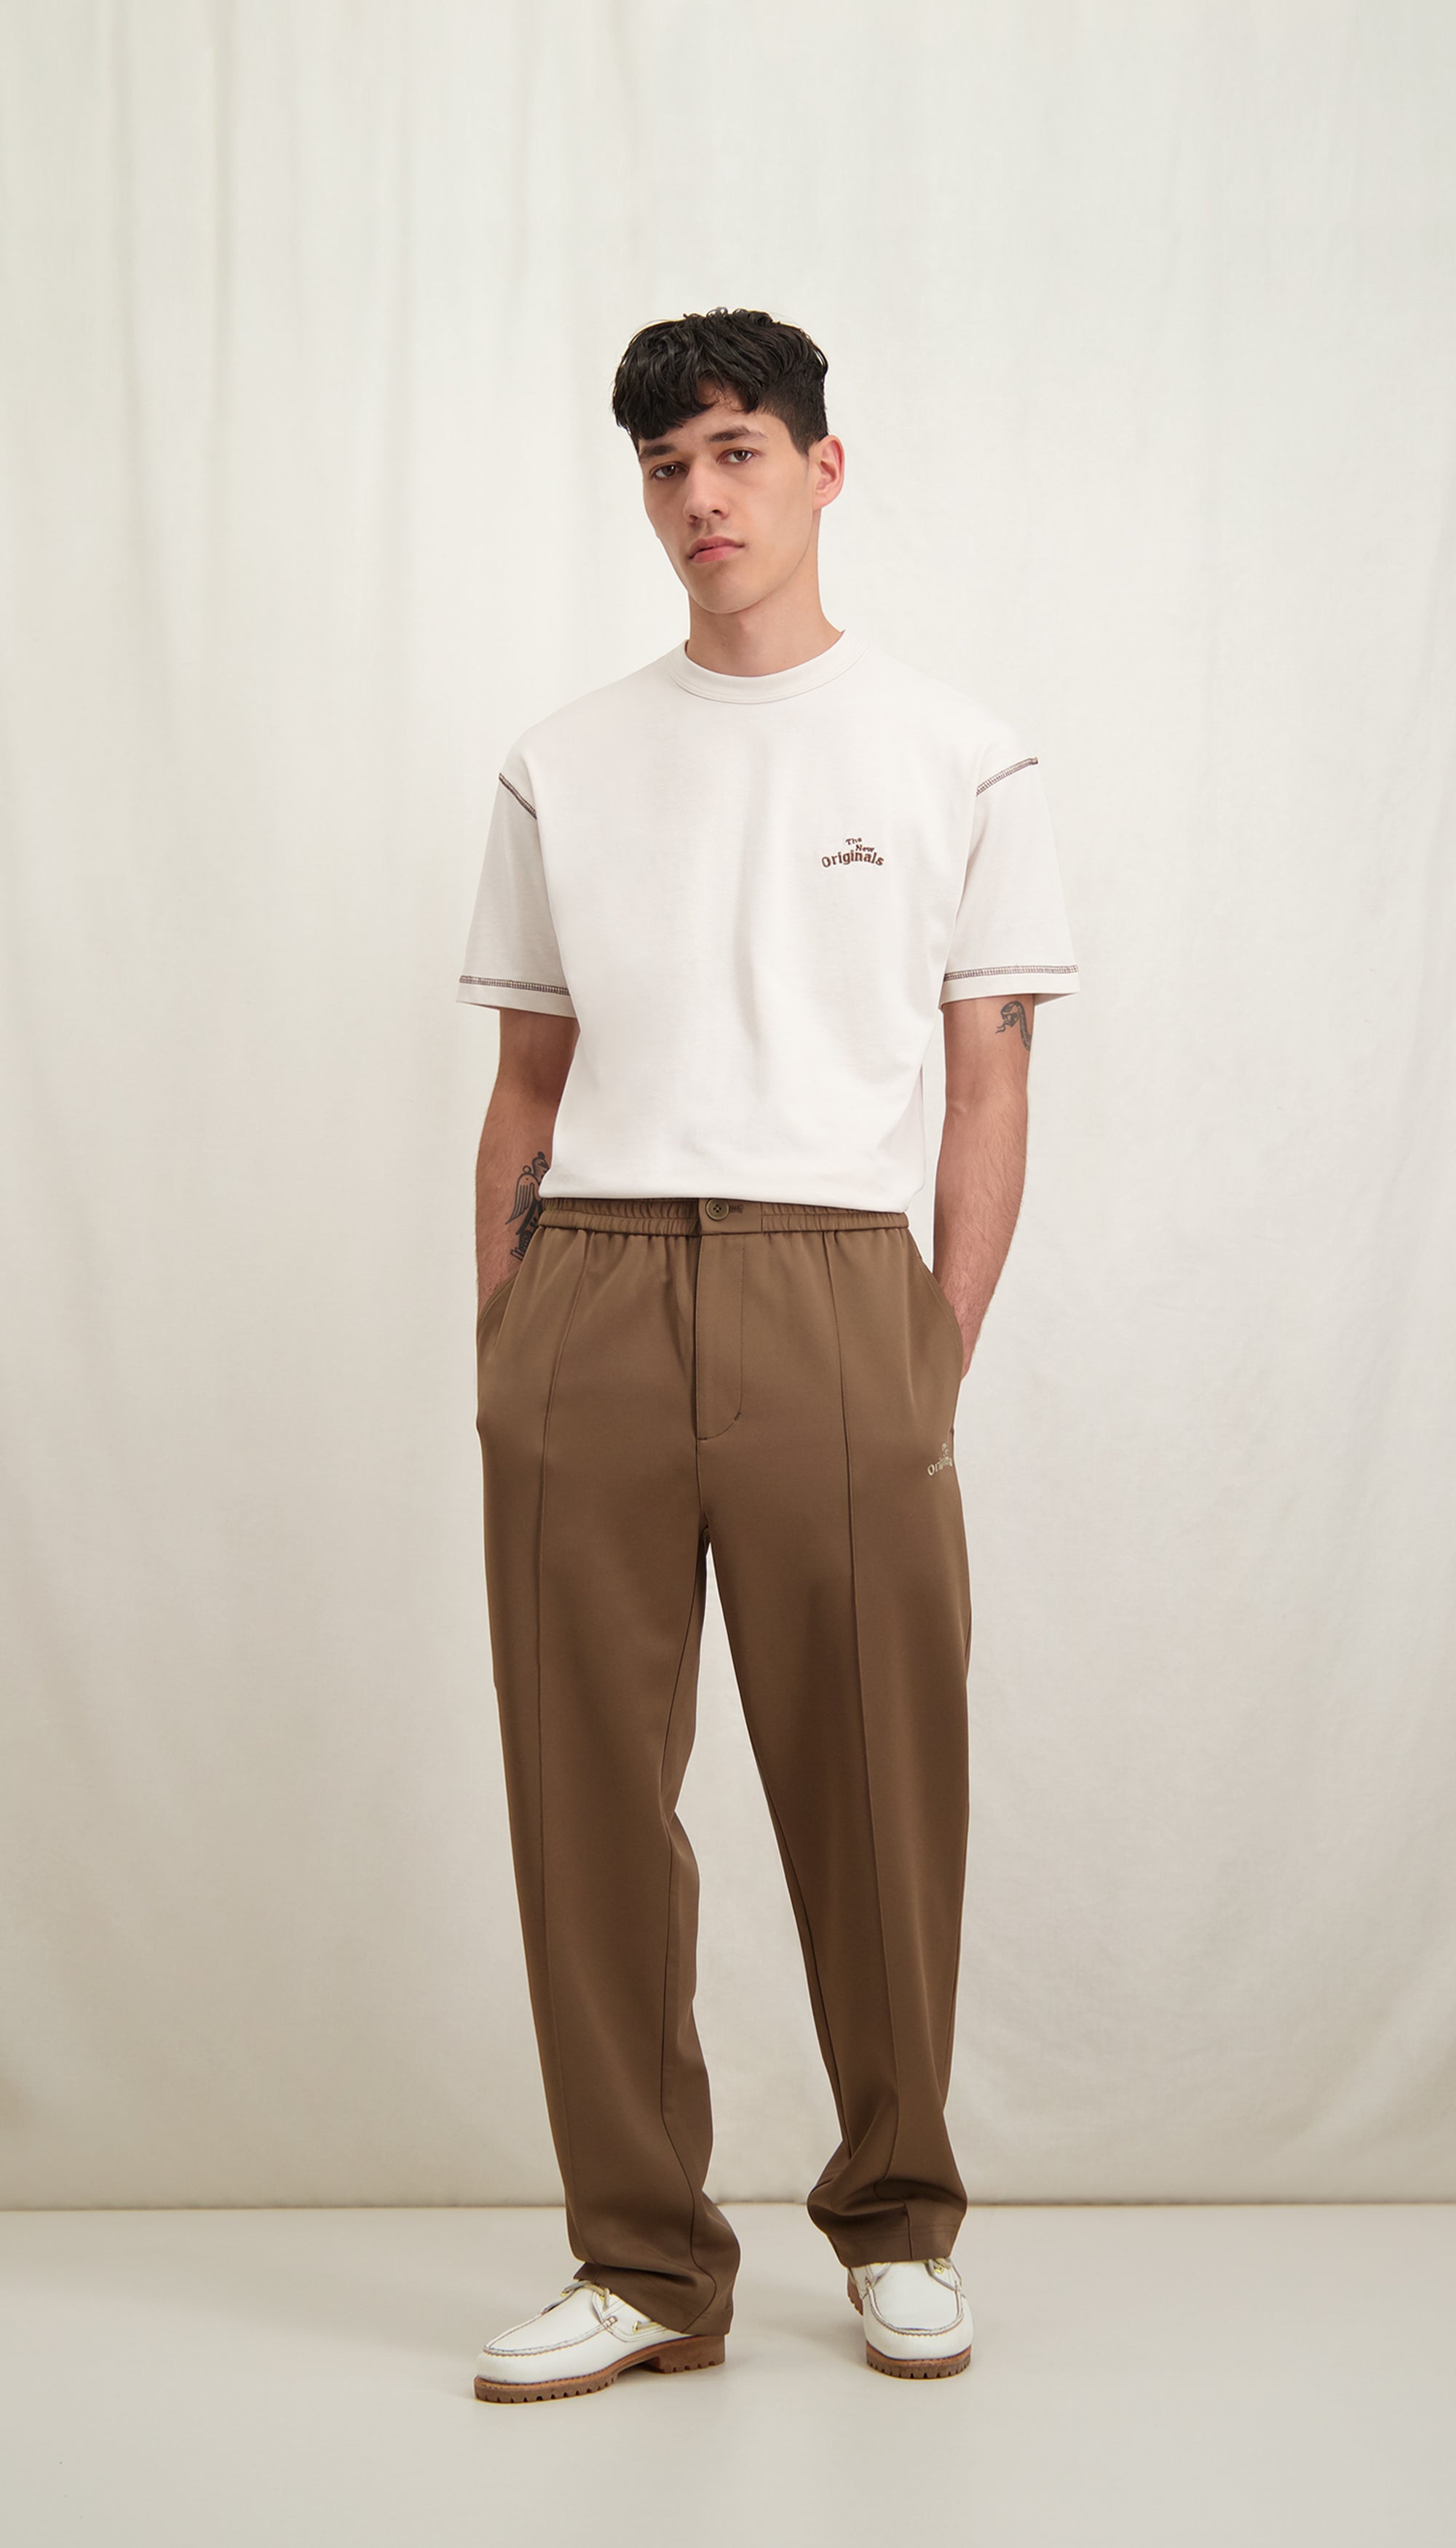 Workman Embroidered Tee White Sand